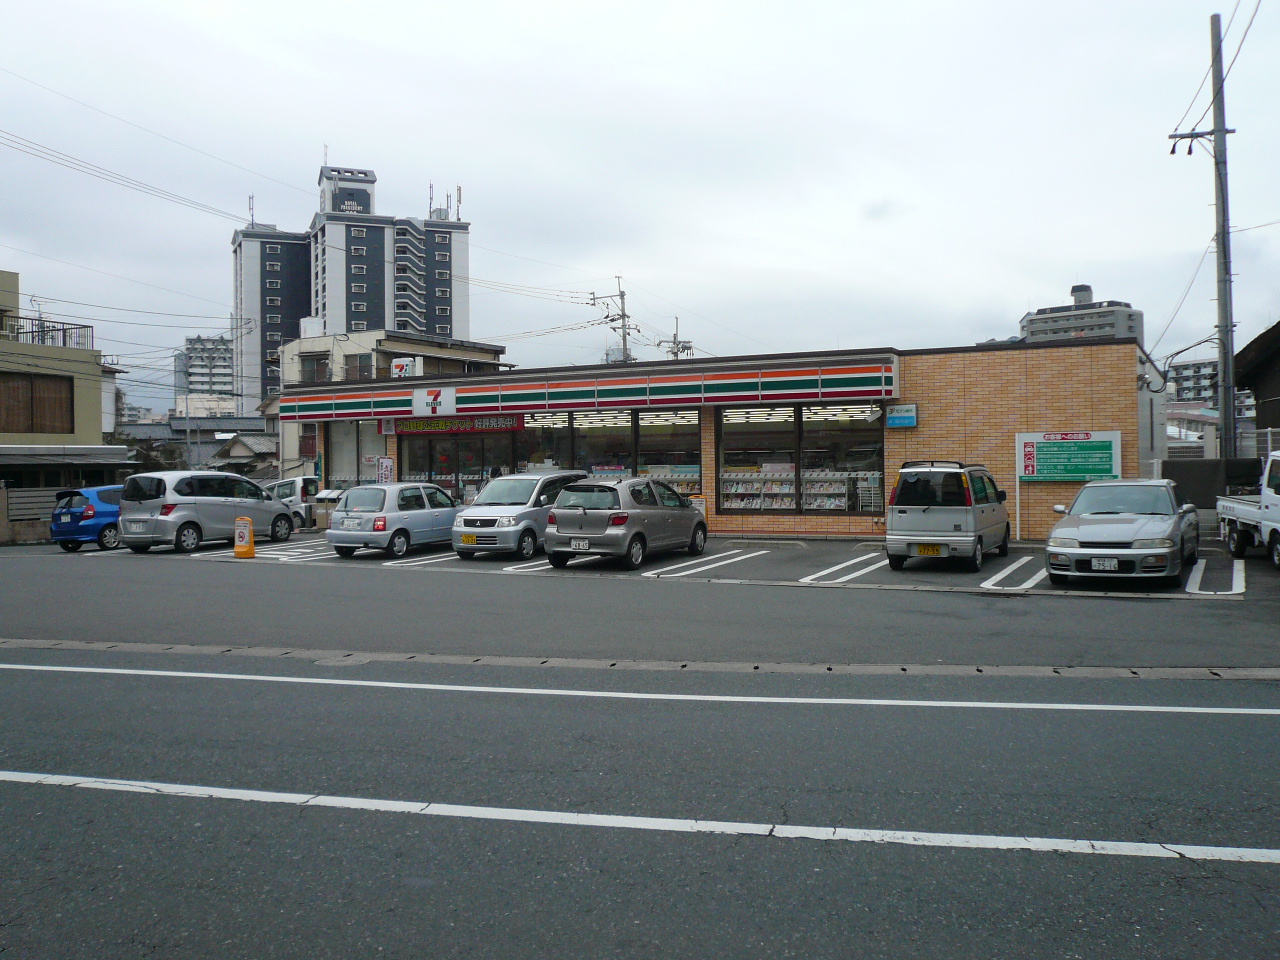 Convenience store. Seven-Eleven Kokura how 1-chome to (convenience store) 143m